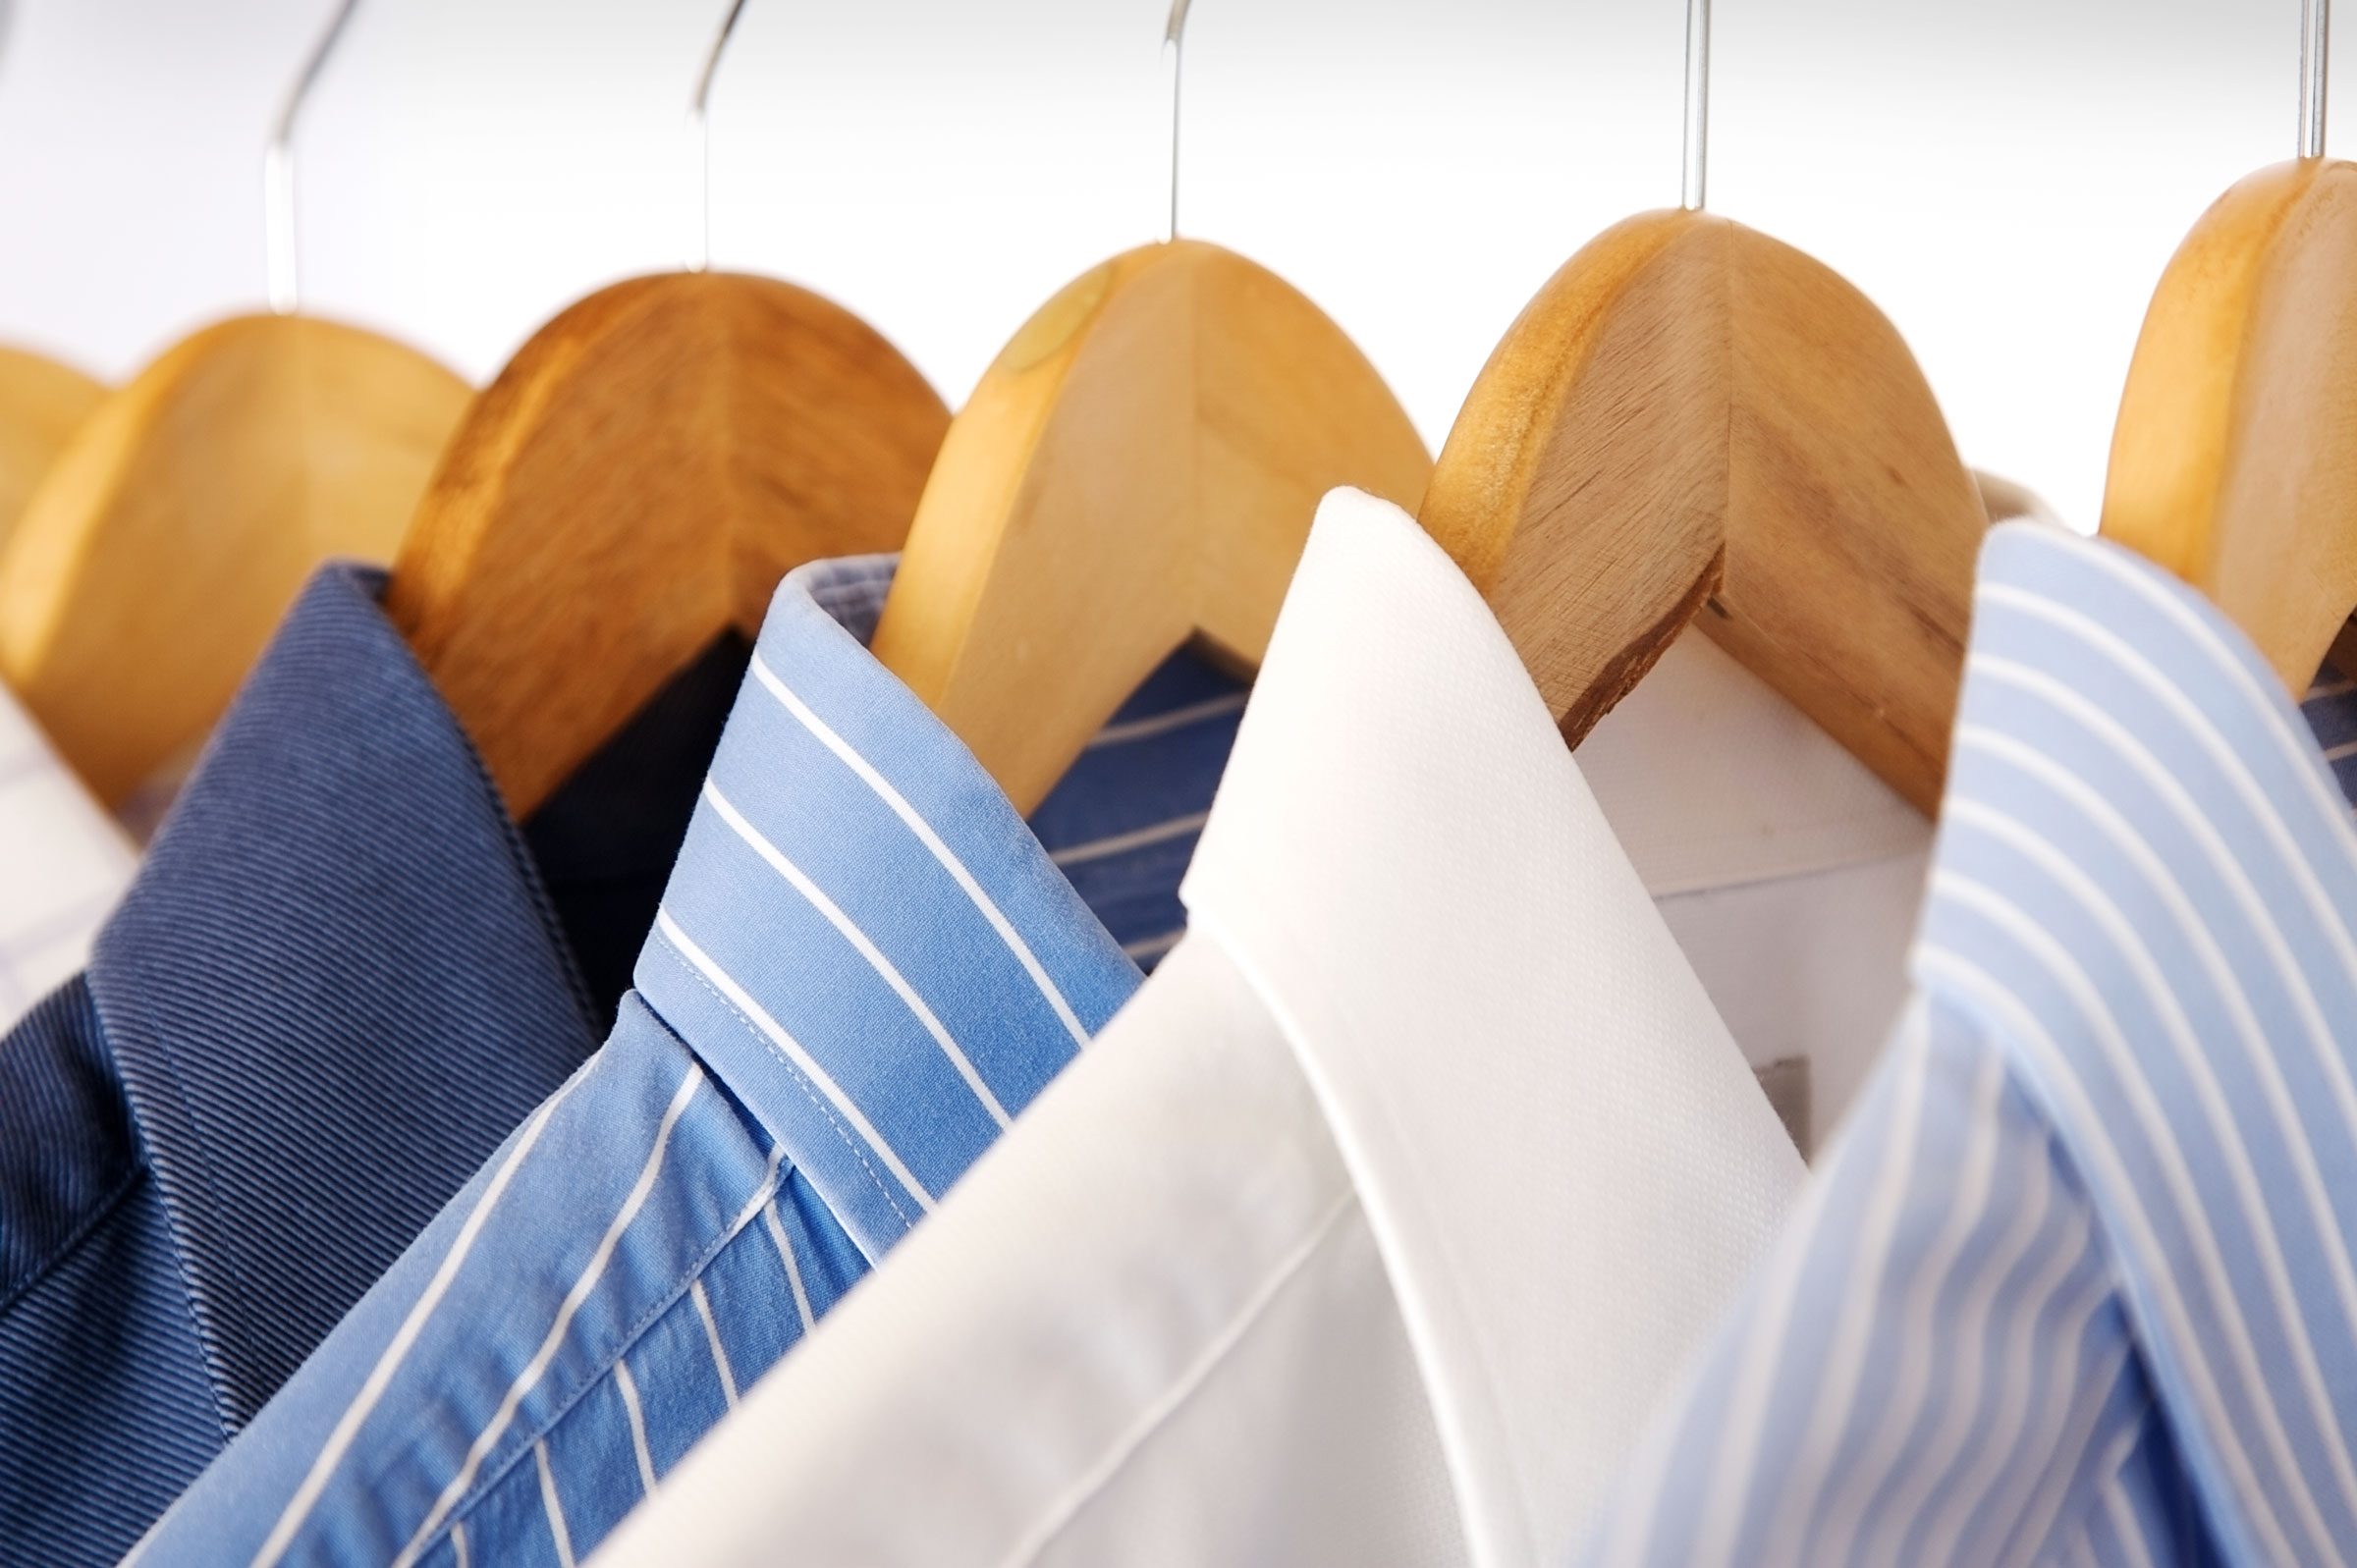 The 'dry clean only' label on clothes may not be entirely accurate